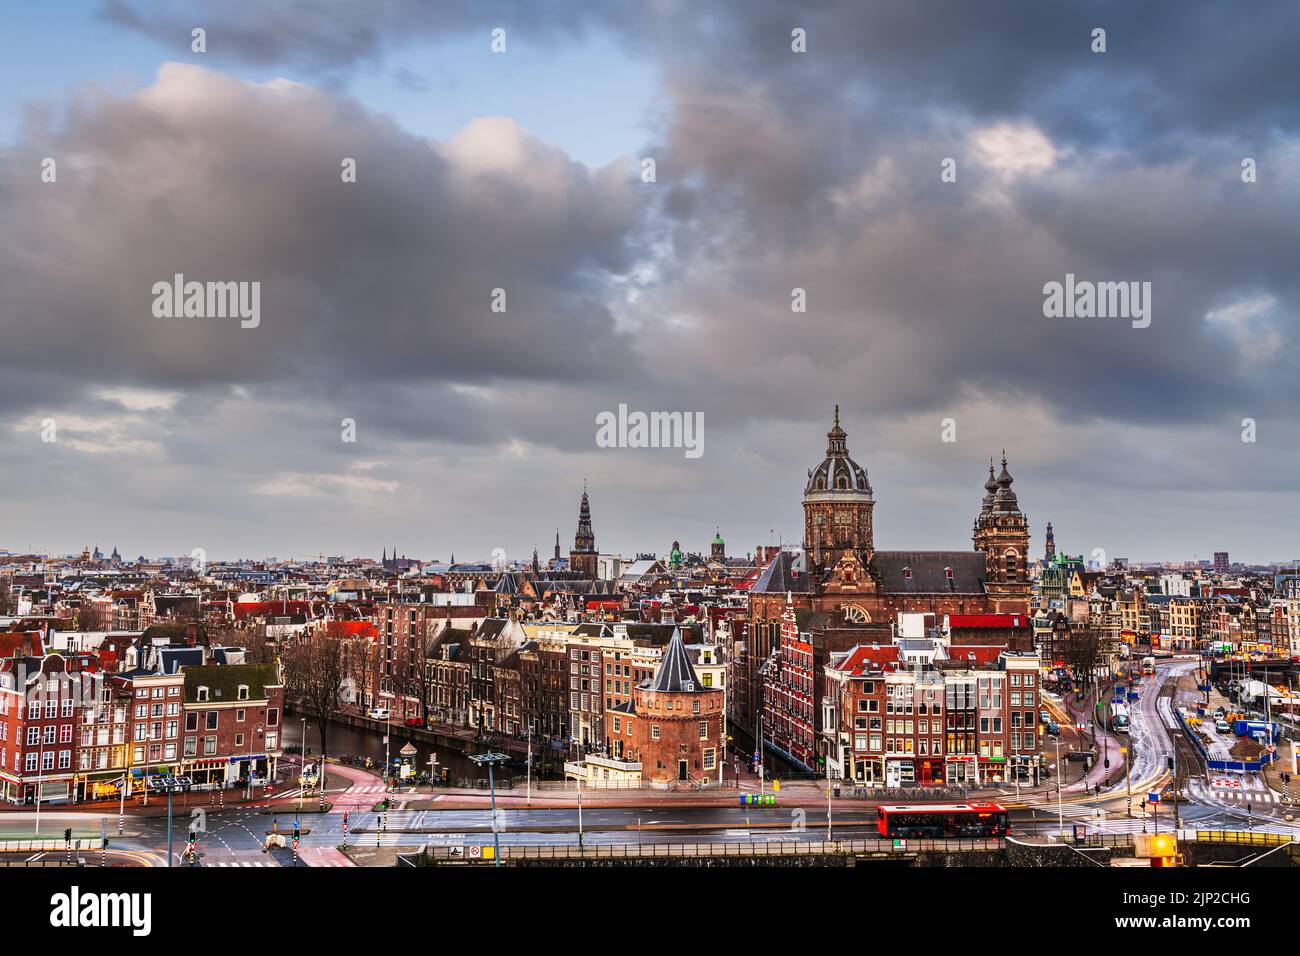 Amsterdam, Netherlands town cityscape over the Old Centre District with Basilica of Saint Nicholas. Stock Photo